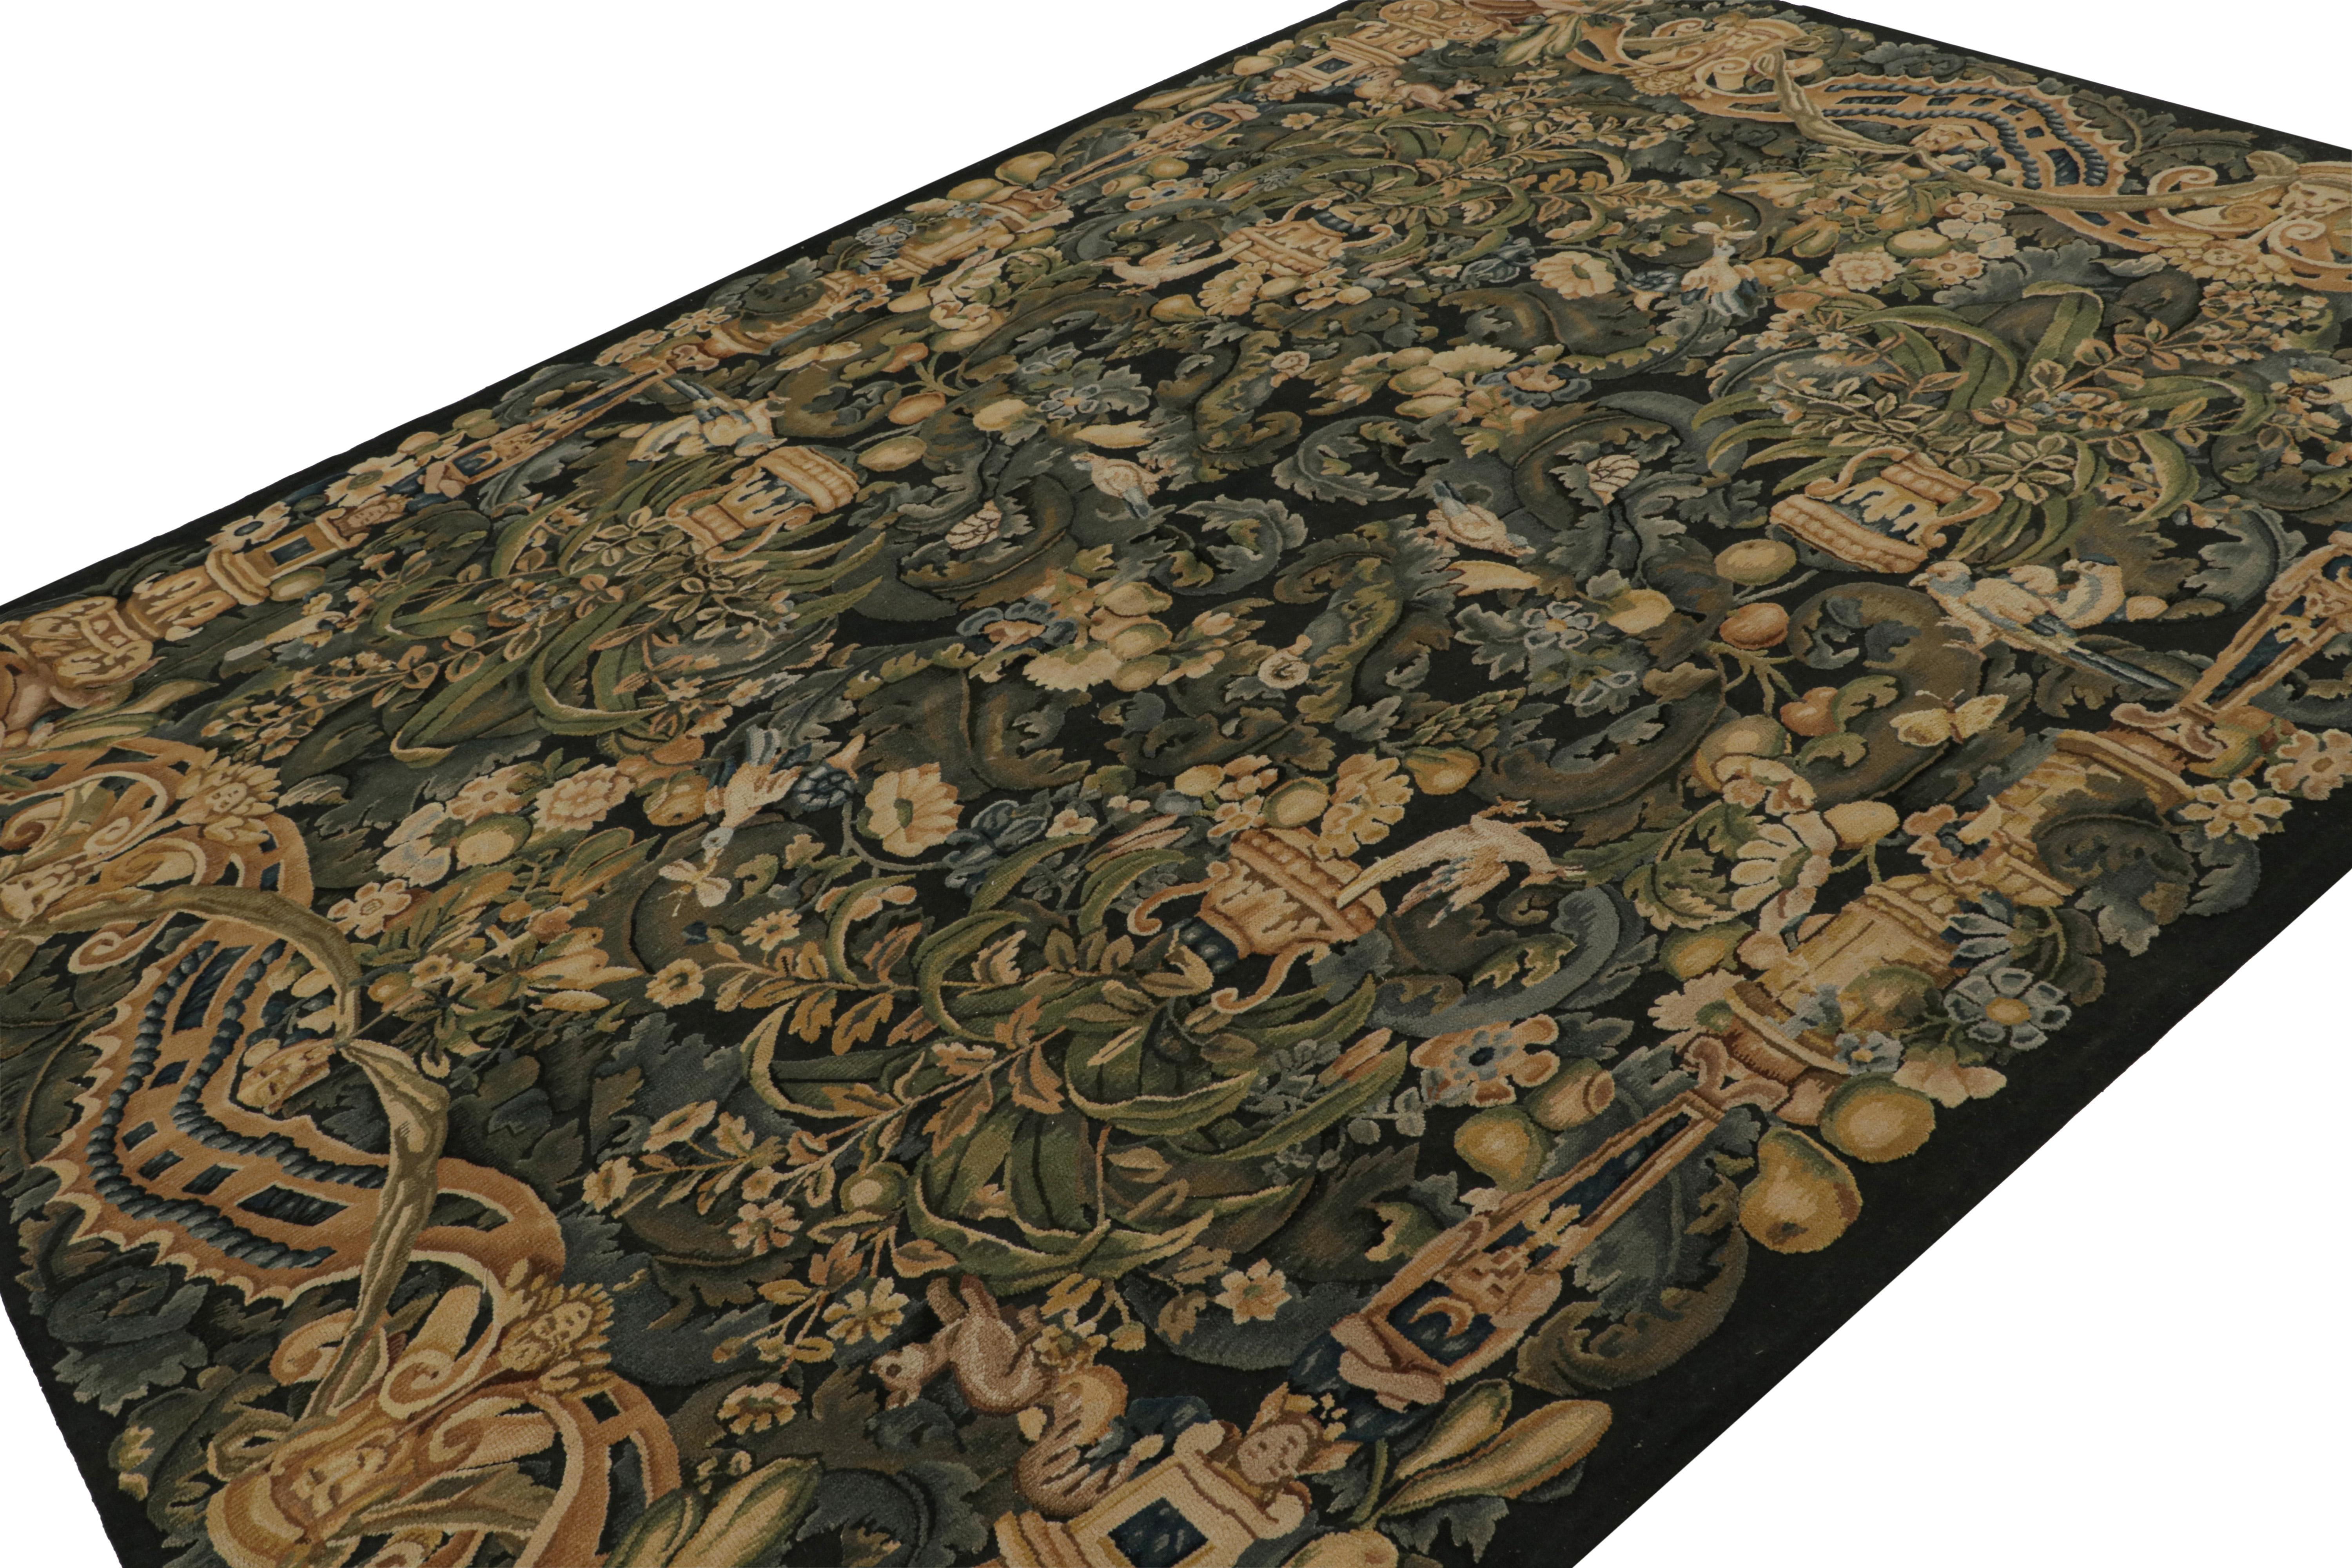 Hand-knotted in wool, this 8x11 European rug has been inspired by English Tudor rugs and tapestries but a particular style among them once called armorial carpets. The design features dense floral patterns and pictorials in a vibrant colorway.  

On